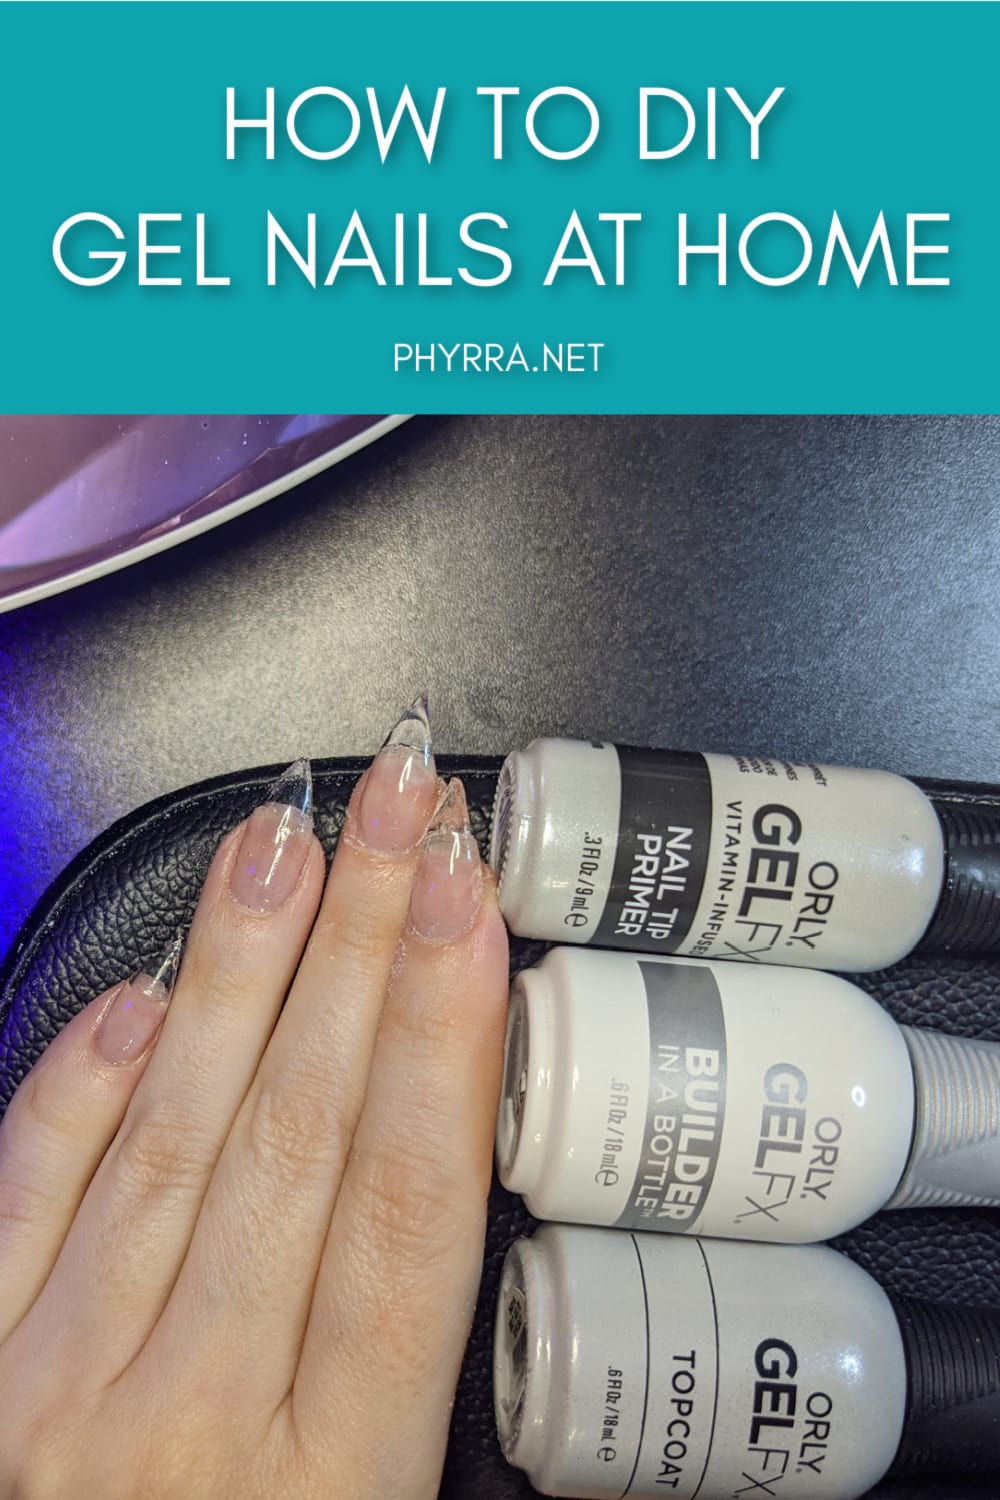 How To DIY Gel Nails At Home A Great Video Tutorial For Beginners